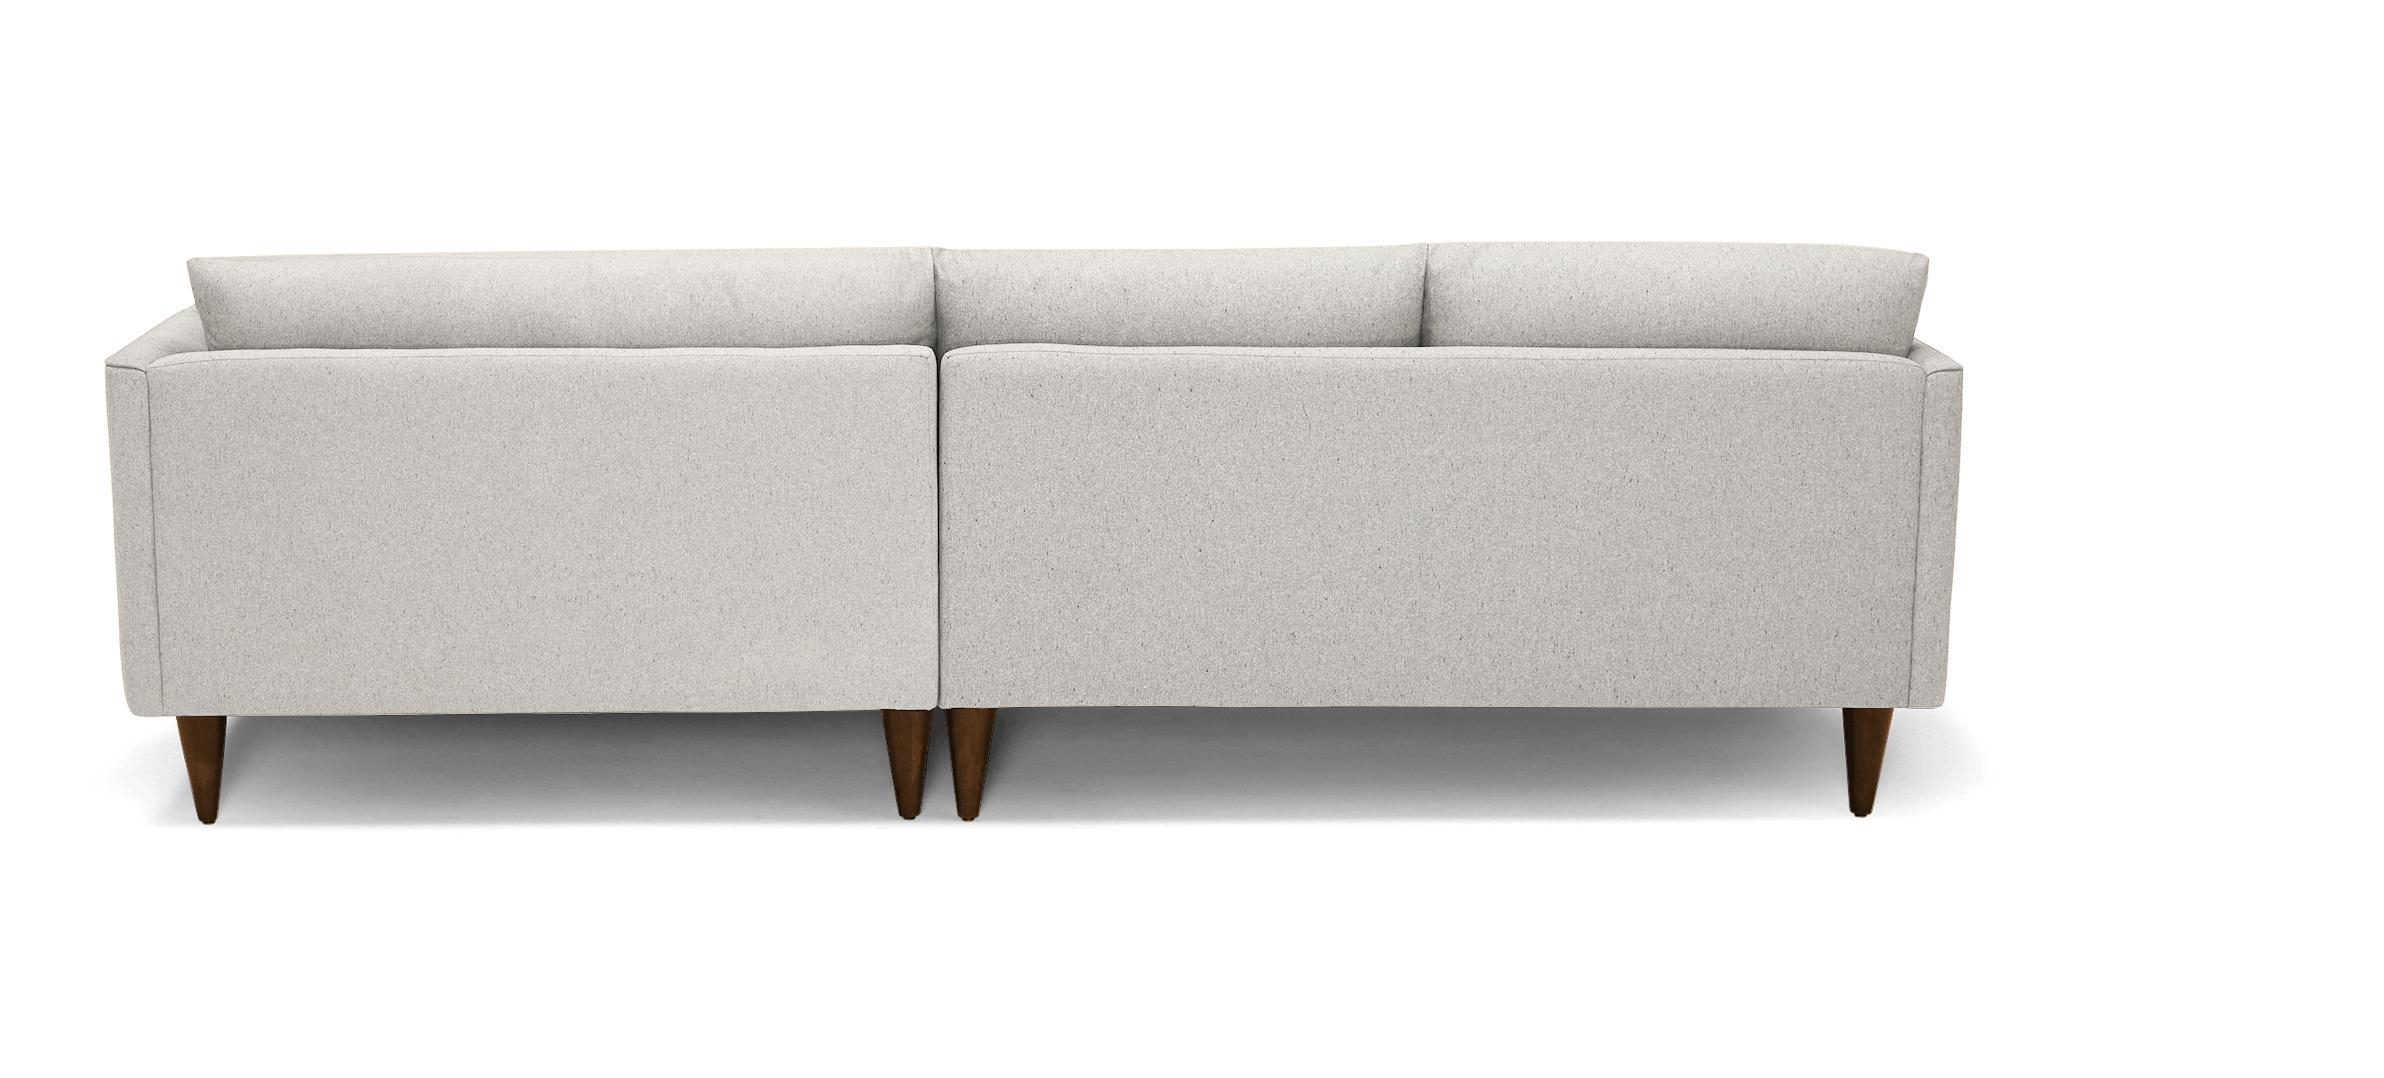 Gray Lewis Mid Century Modern Sectional - Bloke Cotton - Mocha - Right - Cone - Image 4